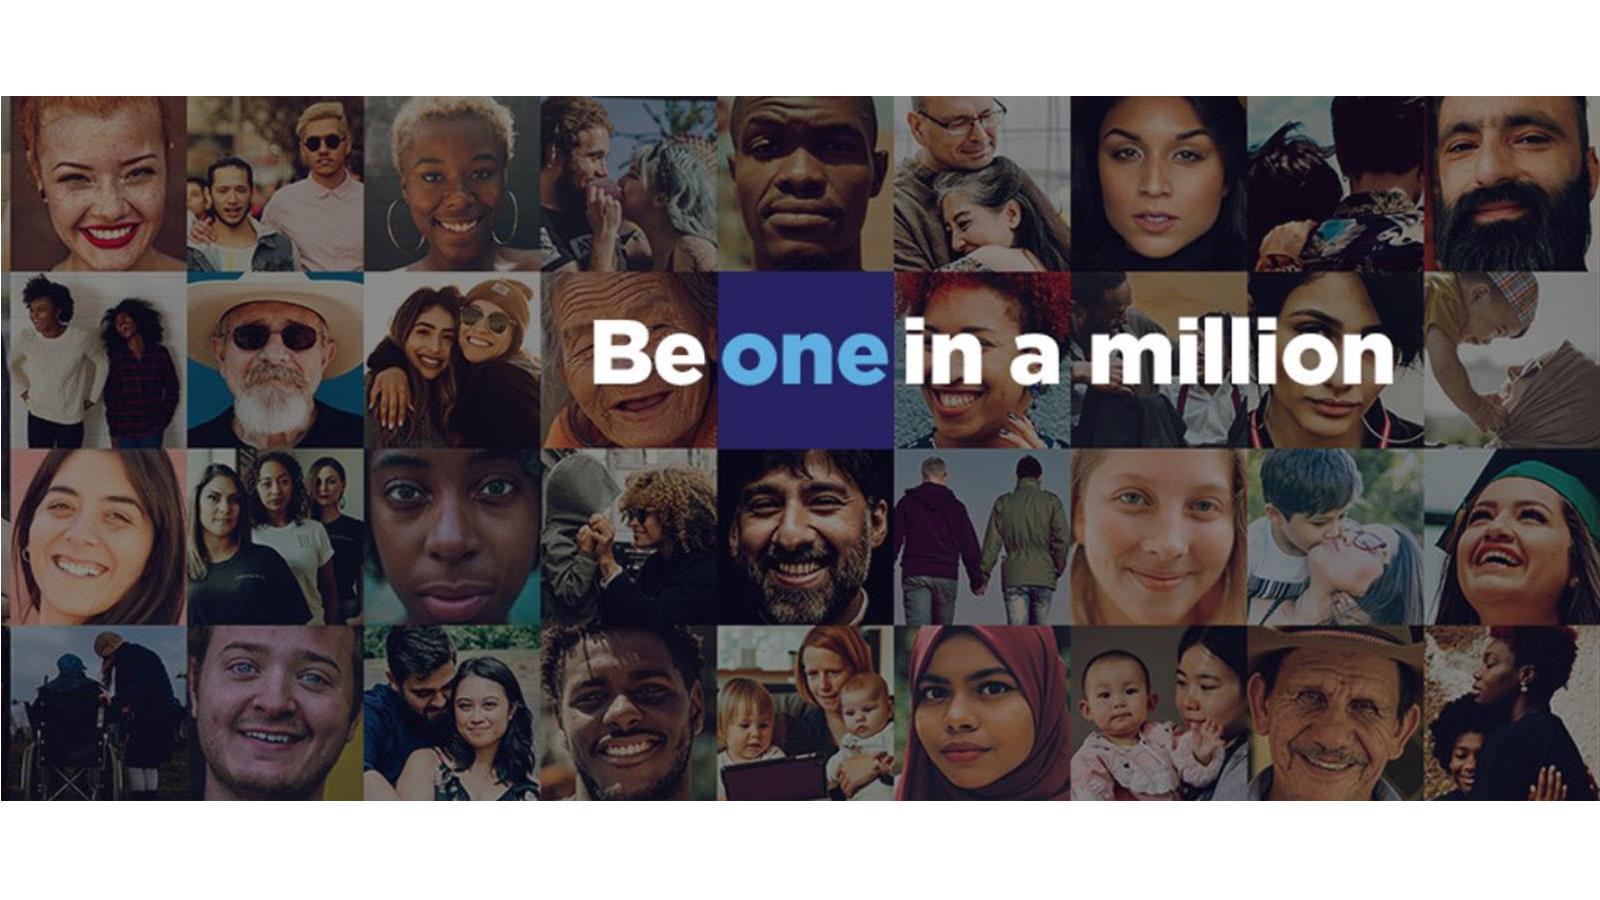 Collage of faces with the text "Be one in a million"